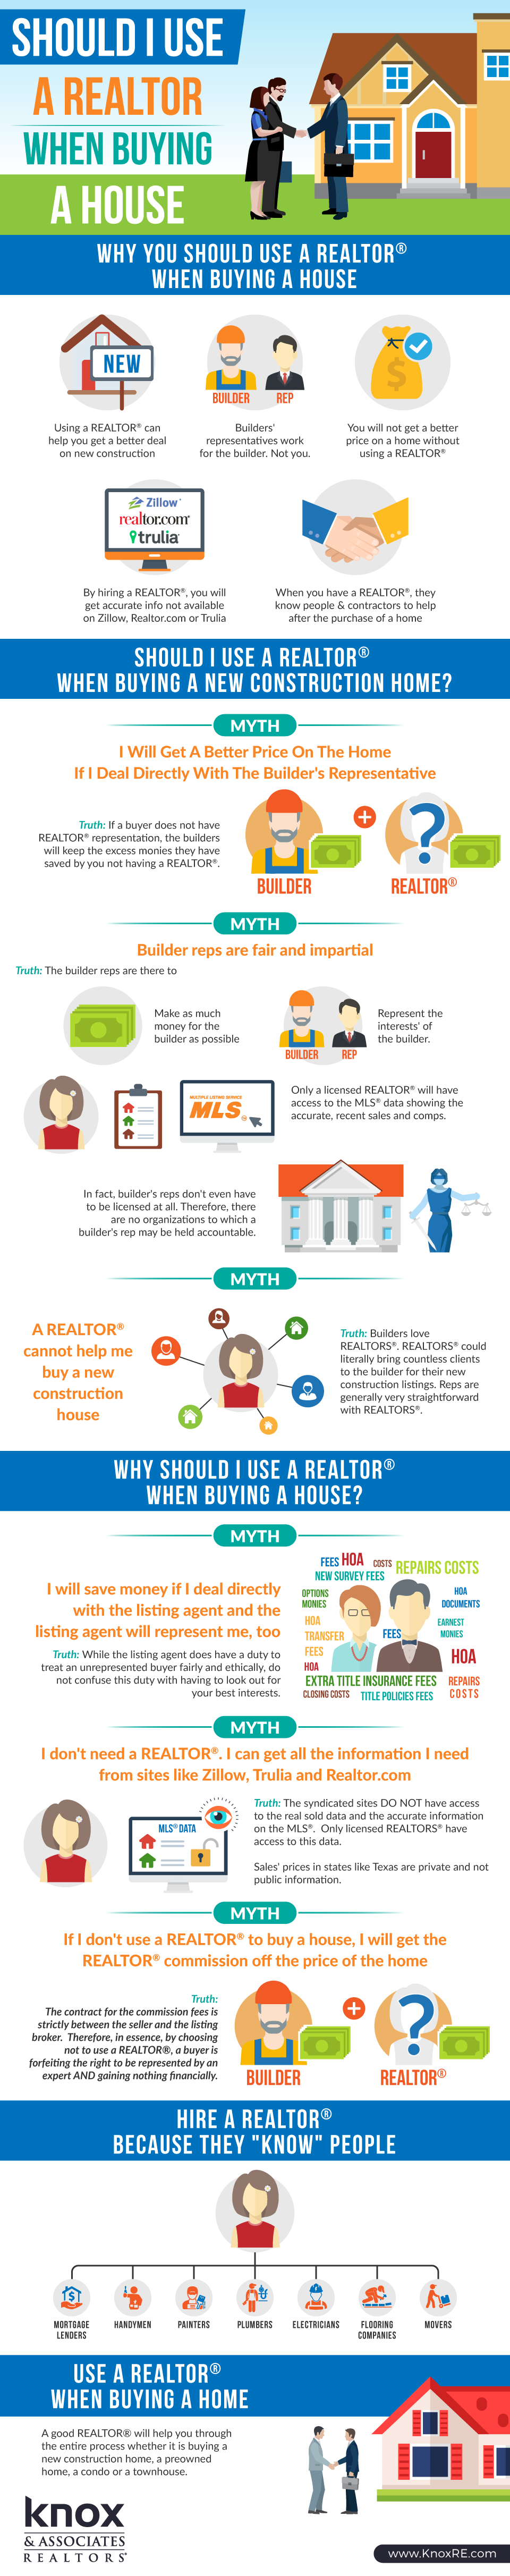 Buying A House Without A Realtor You Probably Aren T Getting The Deal You Think